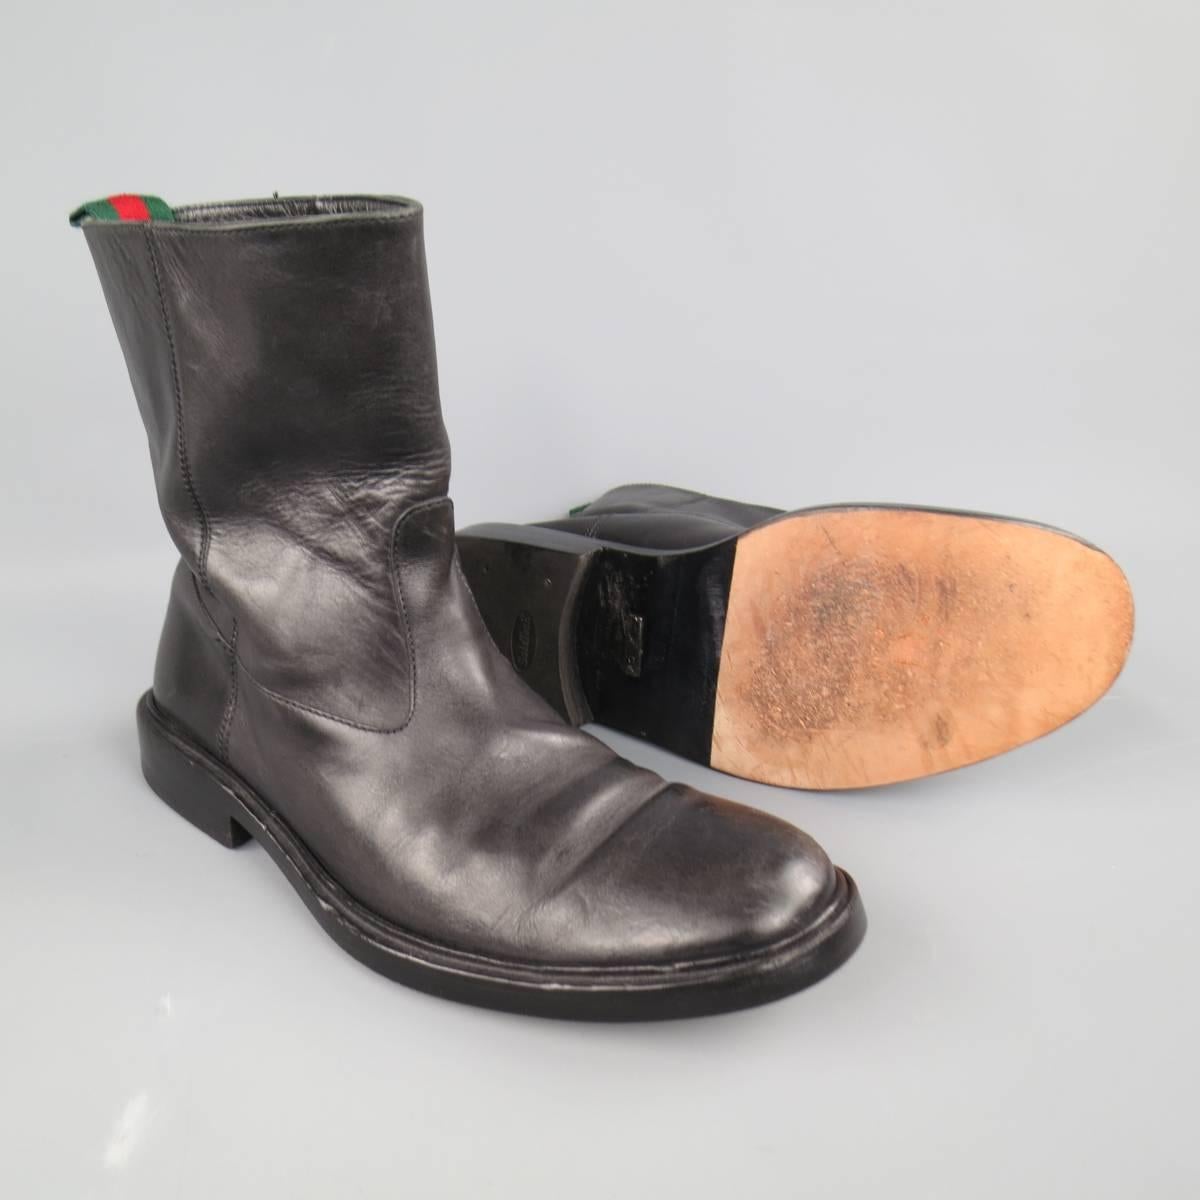 Classic GUCCI pull on biker style boots in black leather featuring a round toe,medium  tall shaft, and signature green and red striped webbing pull tab on back. Made in Italy.
 
Good Pre-Owned Condition.
Marked: UK 10 D
 
Outsole: 12.75 x 4.75